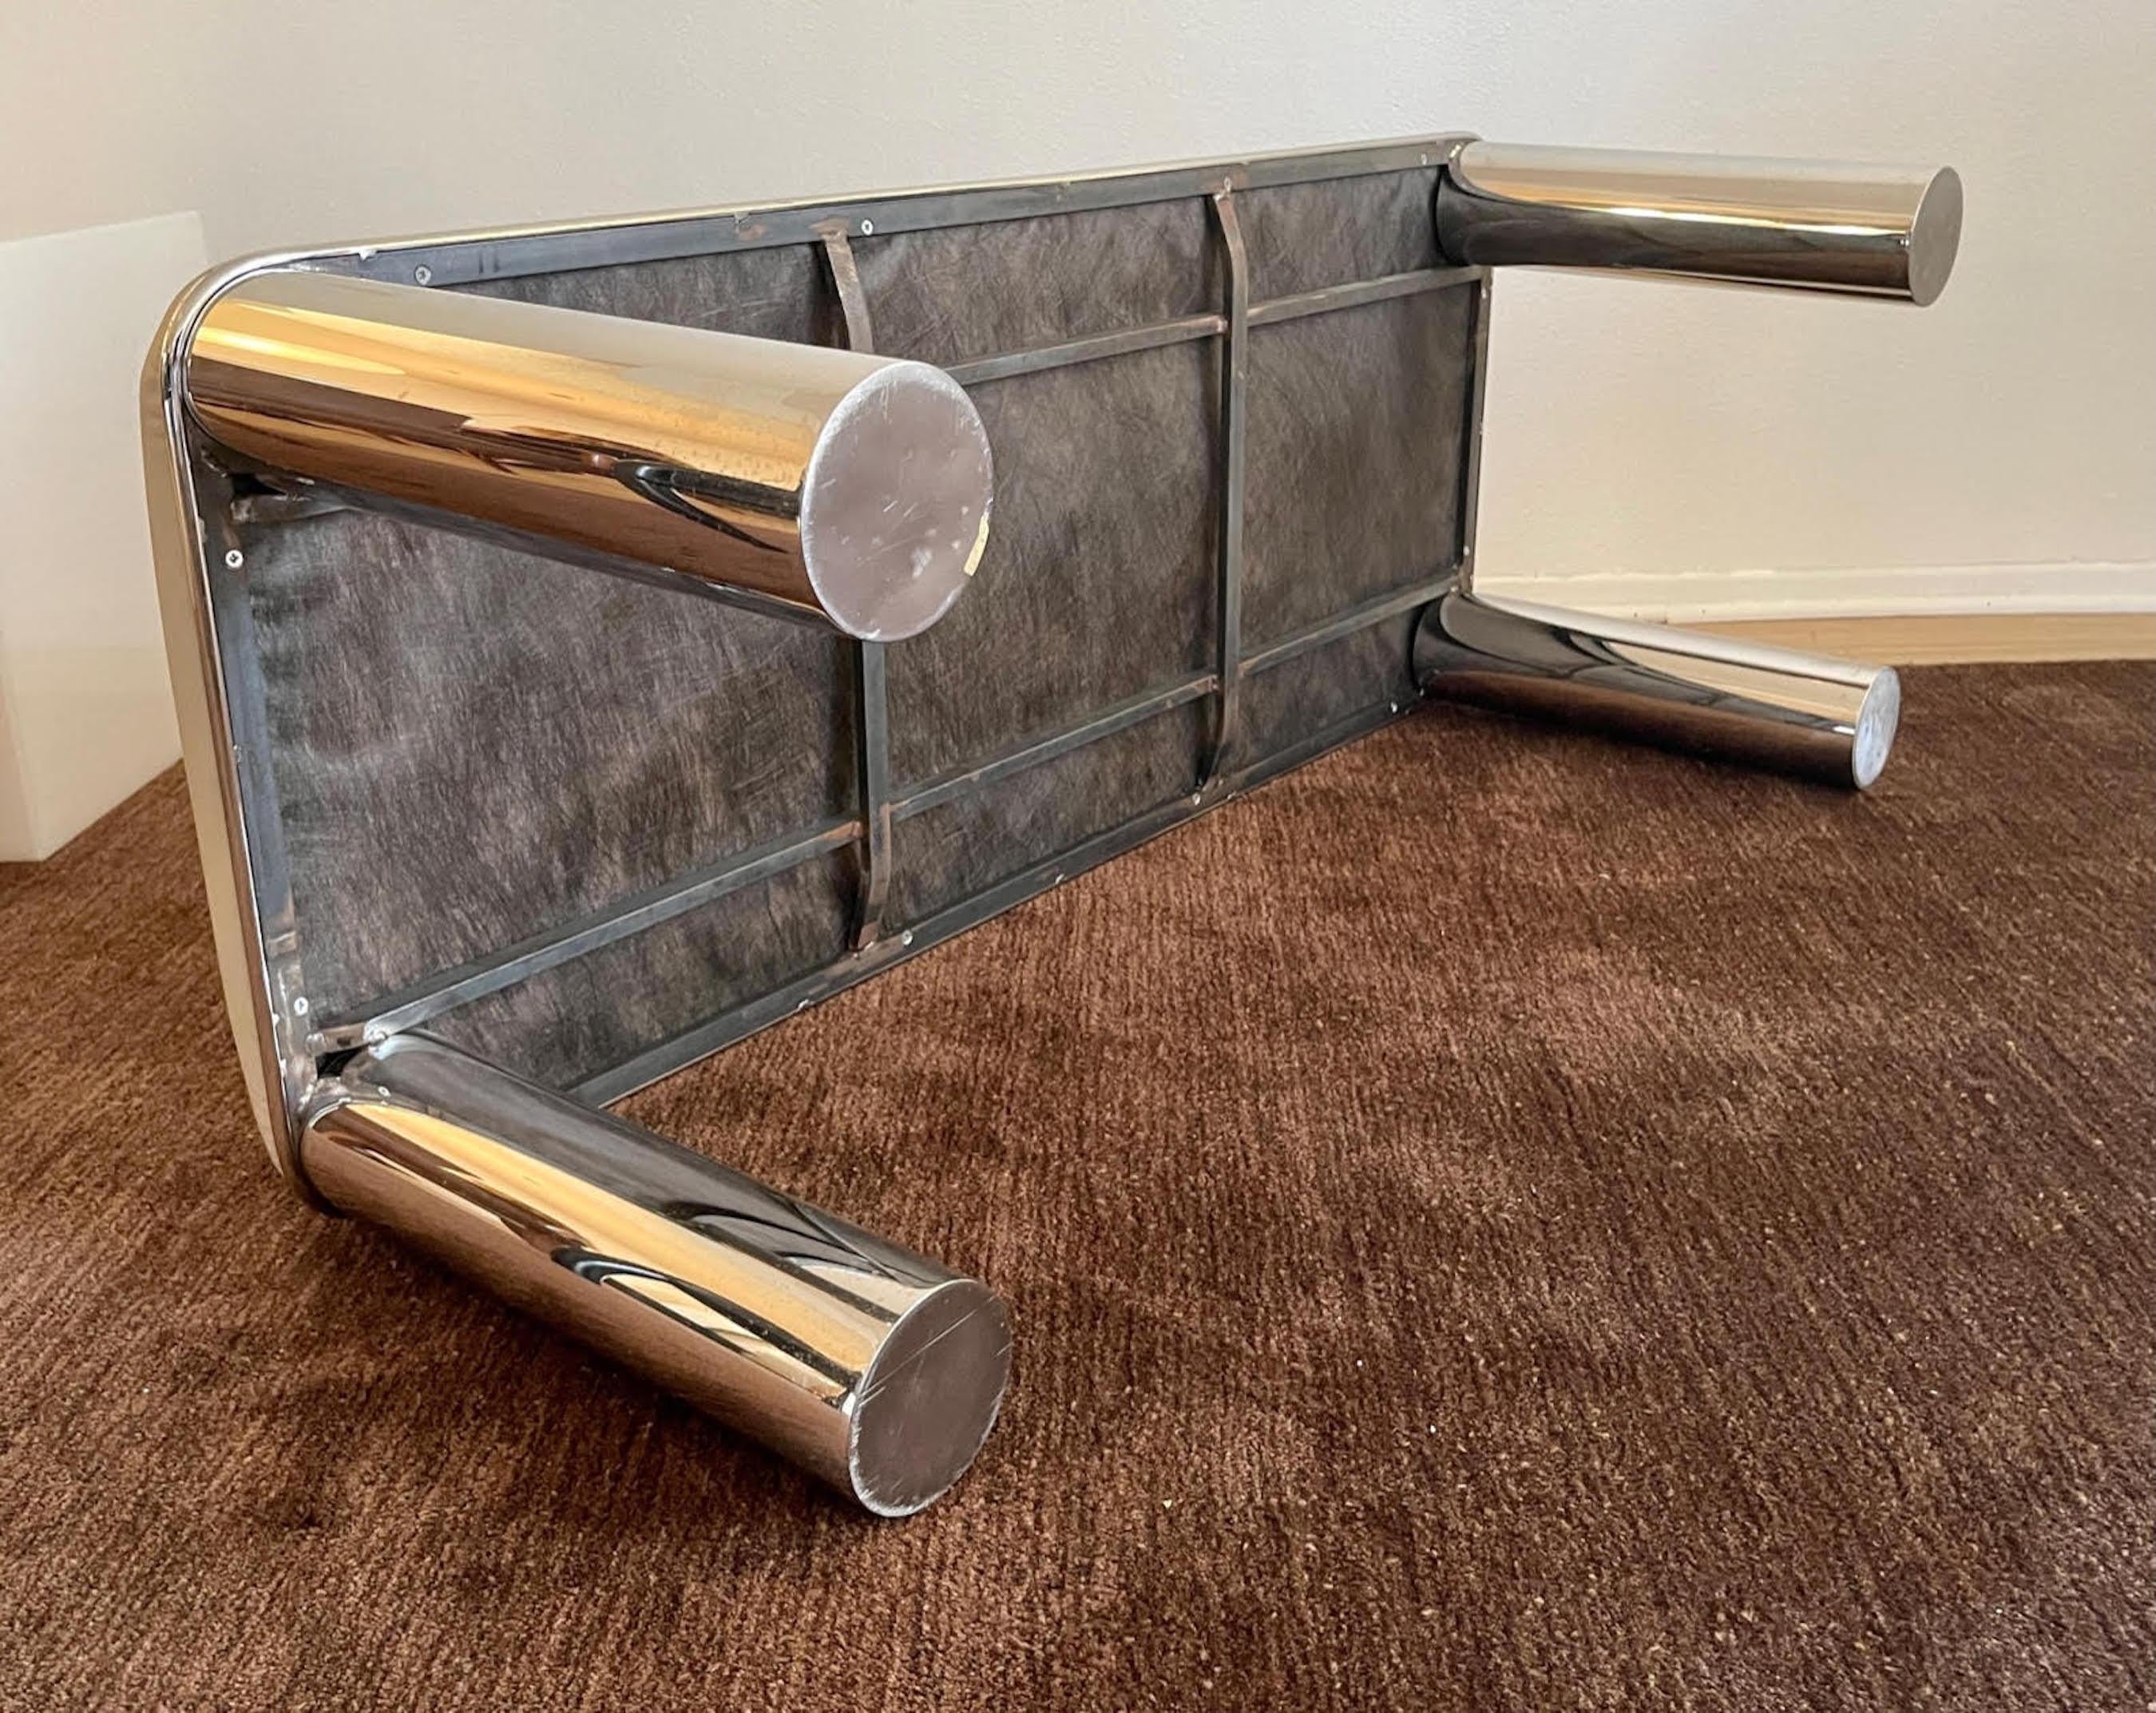 Polished Steel and Leather Bench In Excellent Condition For Sale In Los Angeles, CA